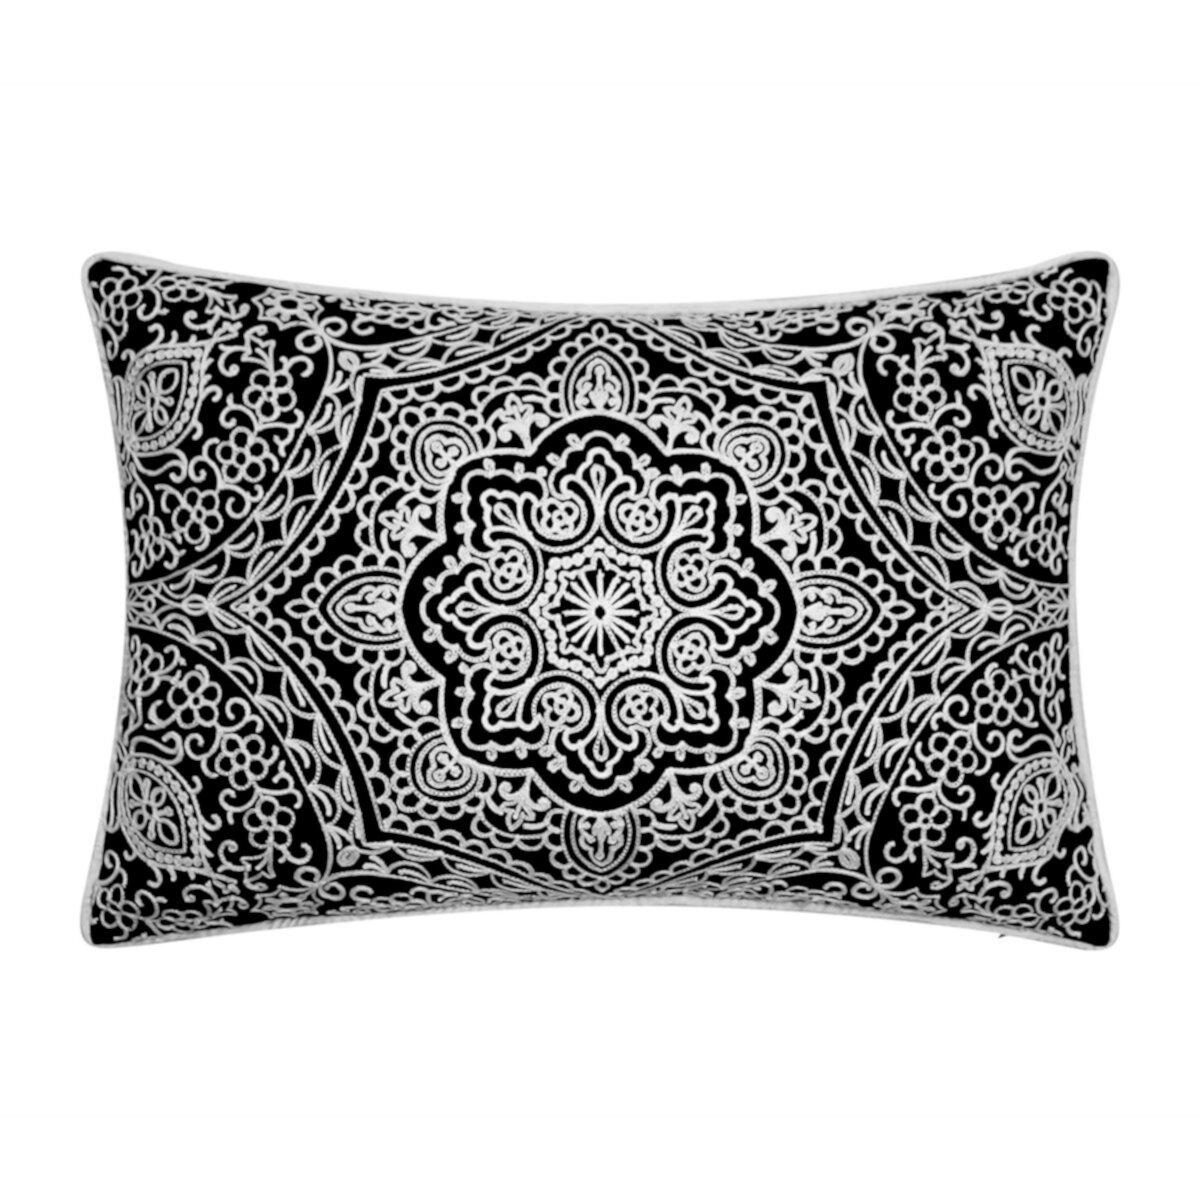 Edie@Home Indoor Outdoor Arabesque Embroidered Throw Pillow Edie at Home